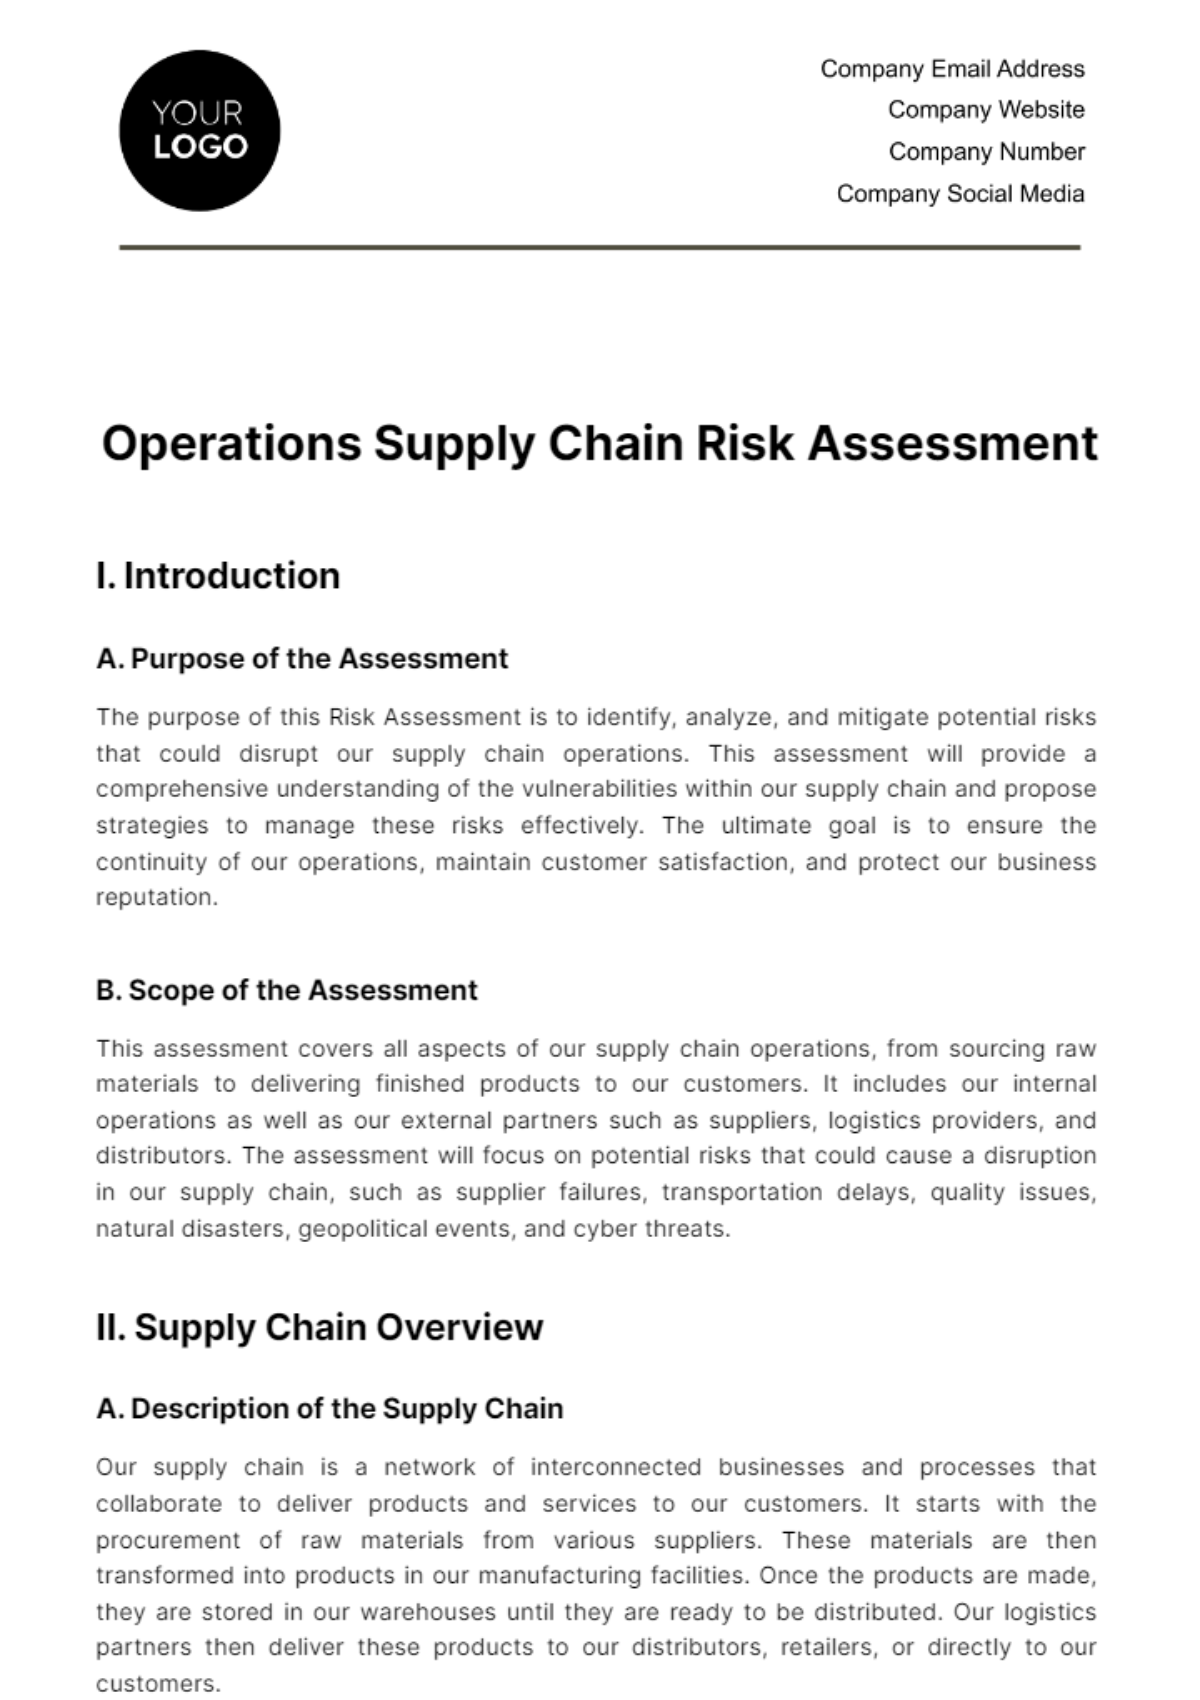 Free Operations Supply Chain Risk Assessment Template